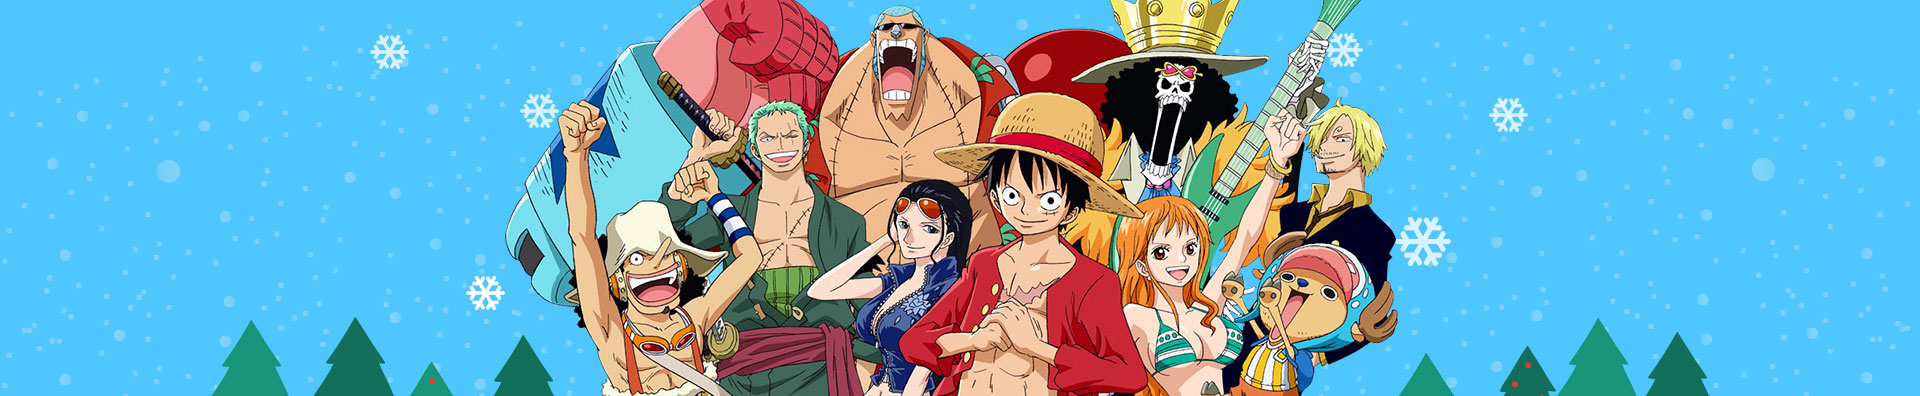 Christmas Greetings from One Piece